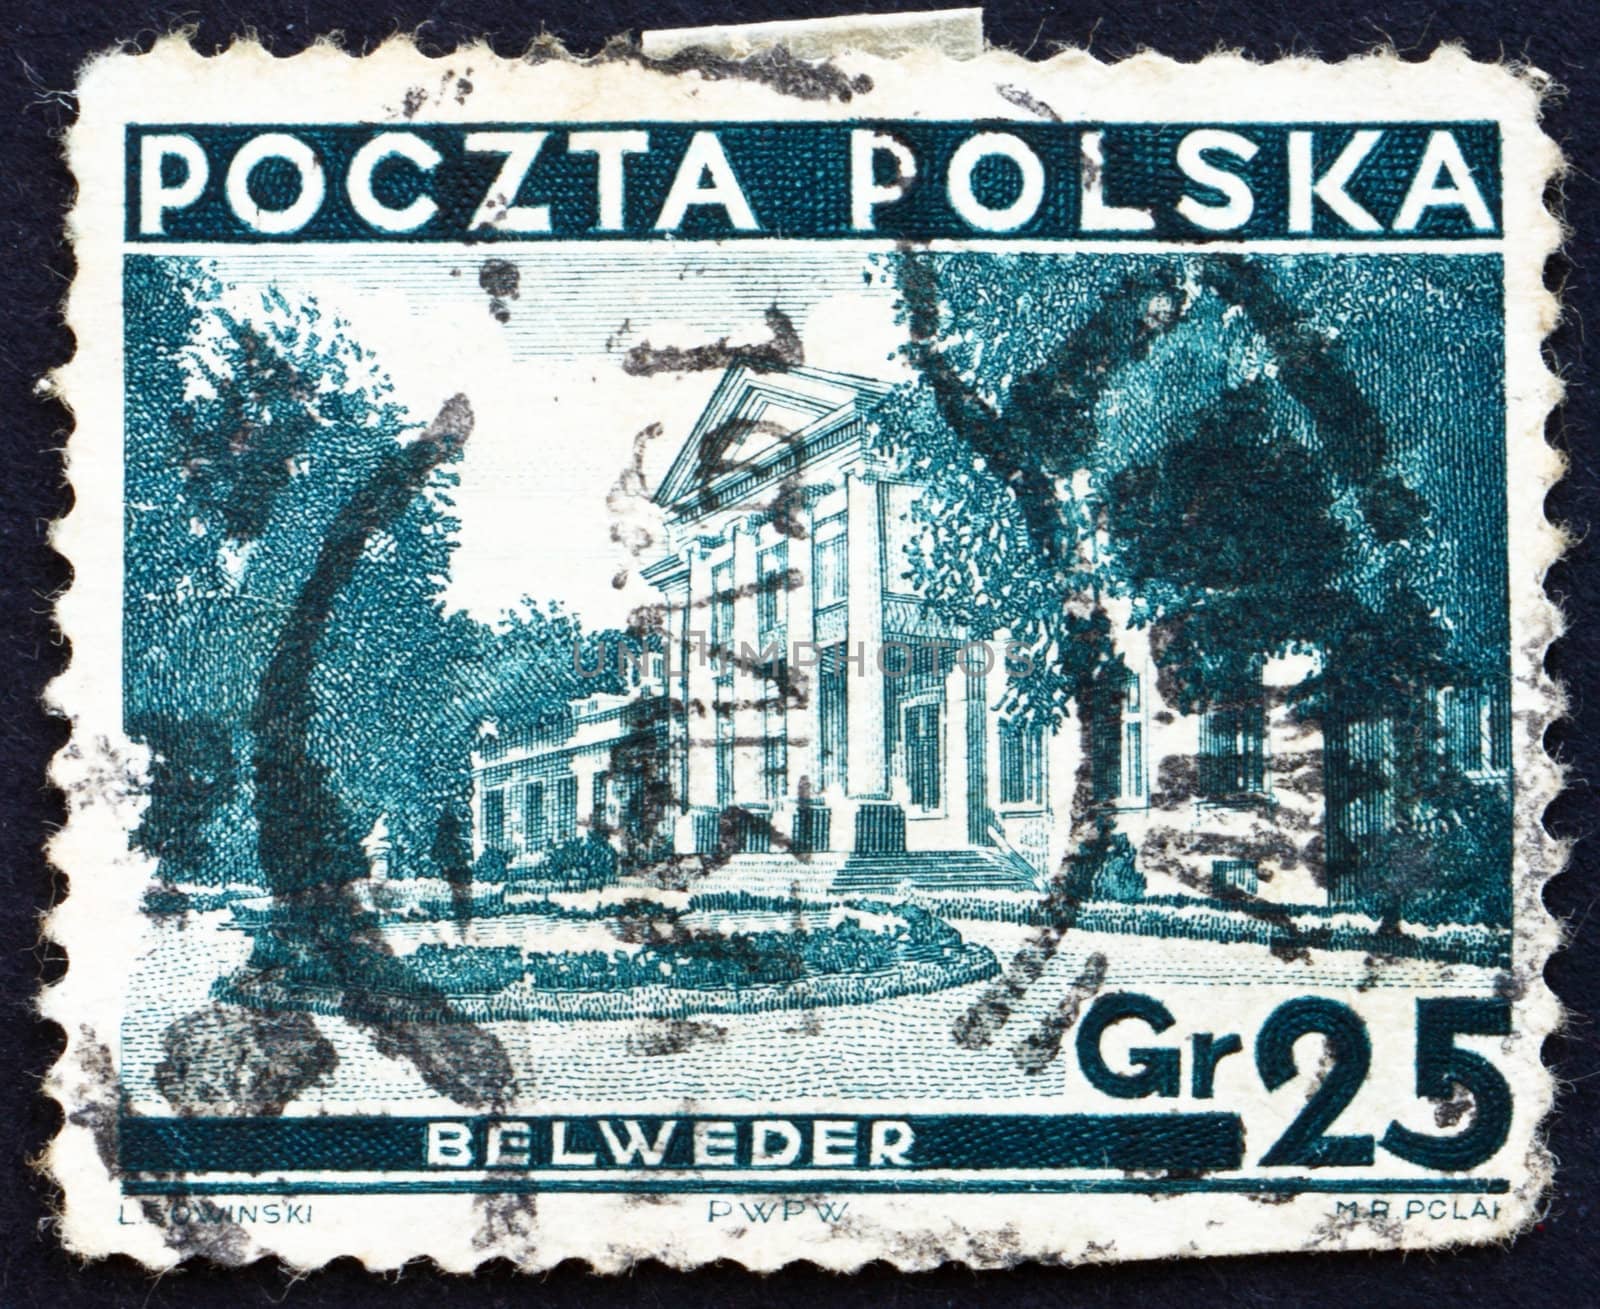 POLAND - CIRCA 1935: a stamp printed in the Poland shows Belweder Palace, Warsaw, circa 1935